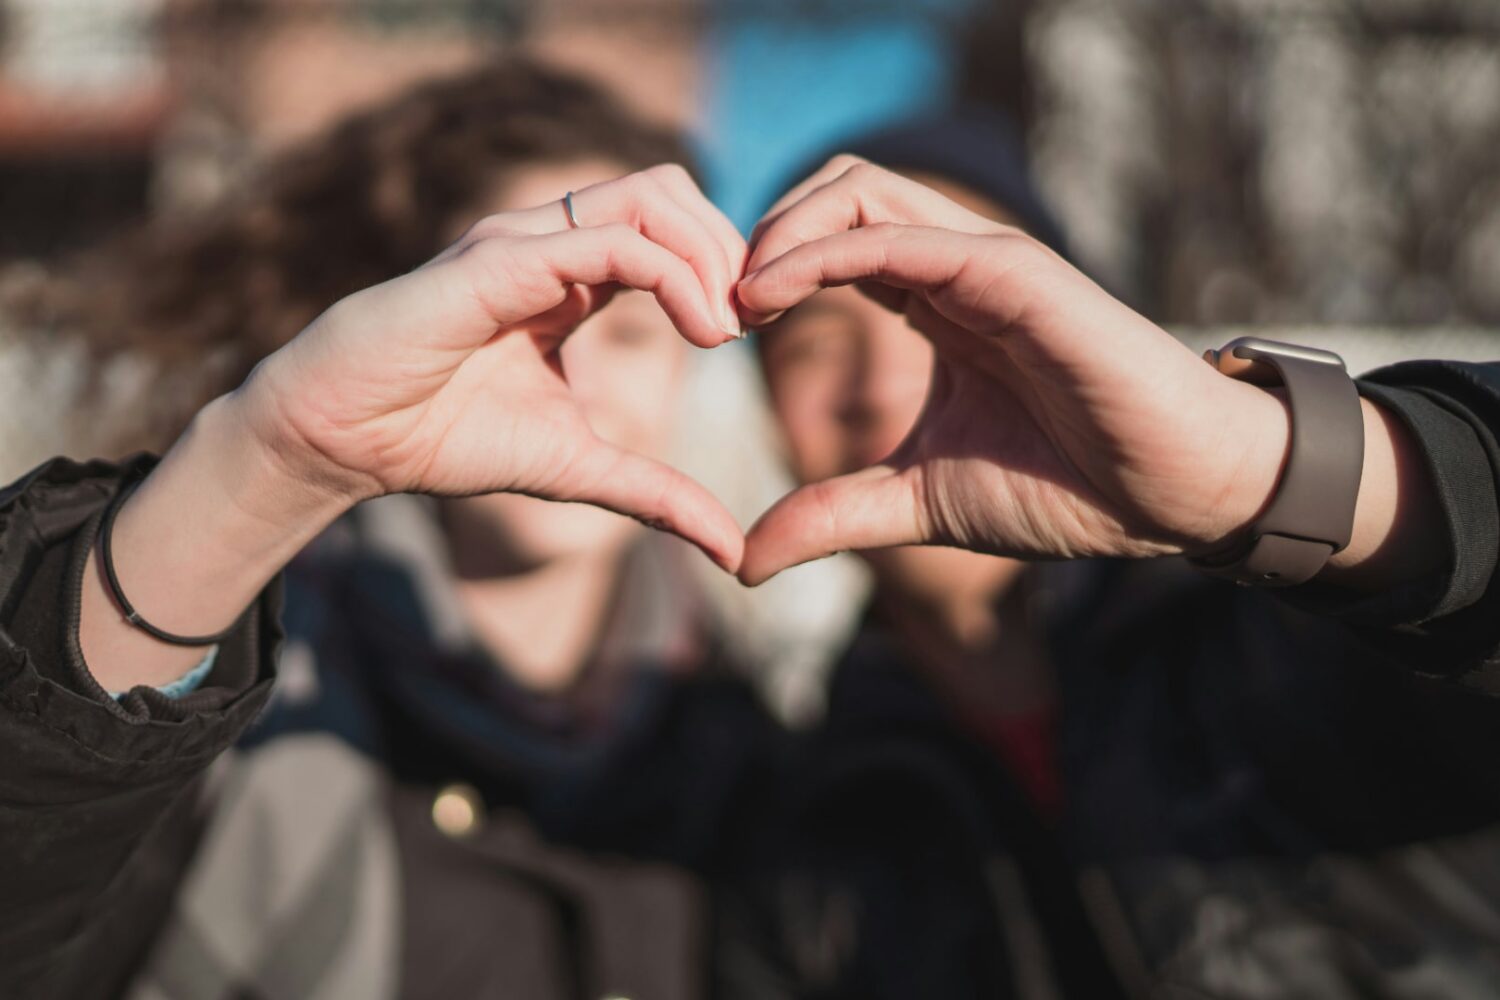 Man and woman combine hands to form a heart hand gesture